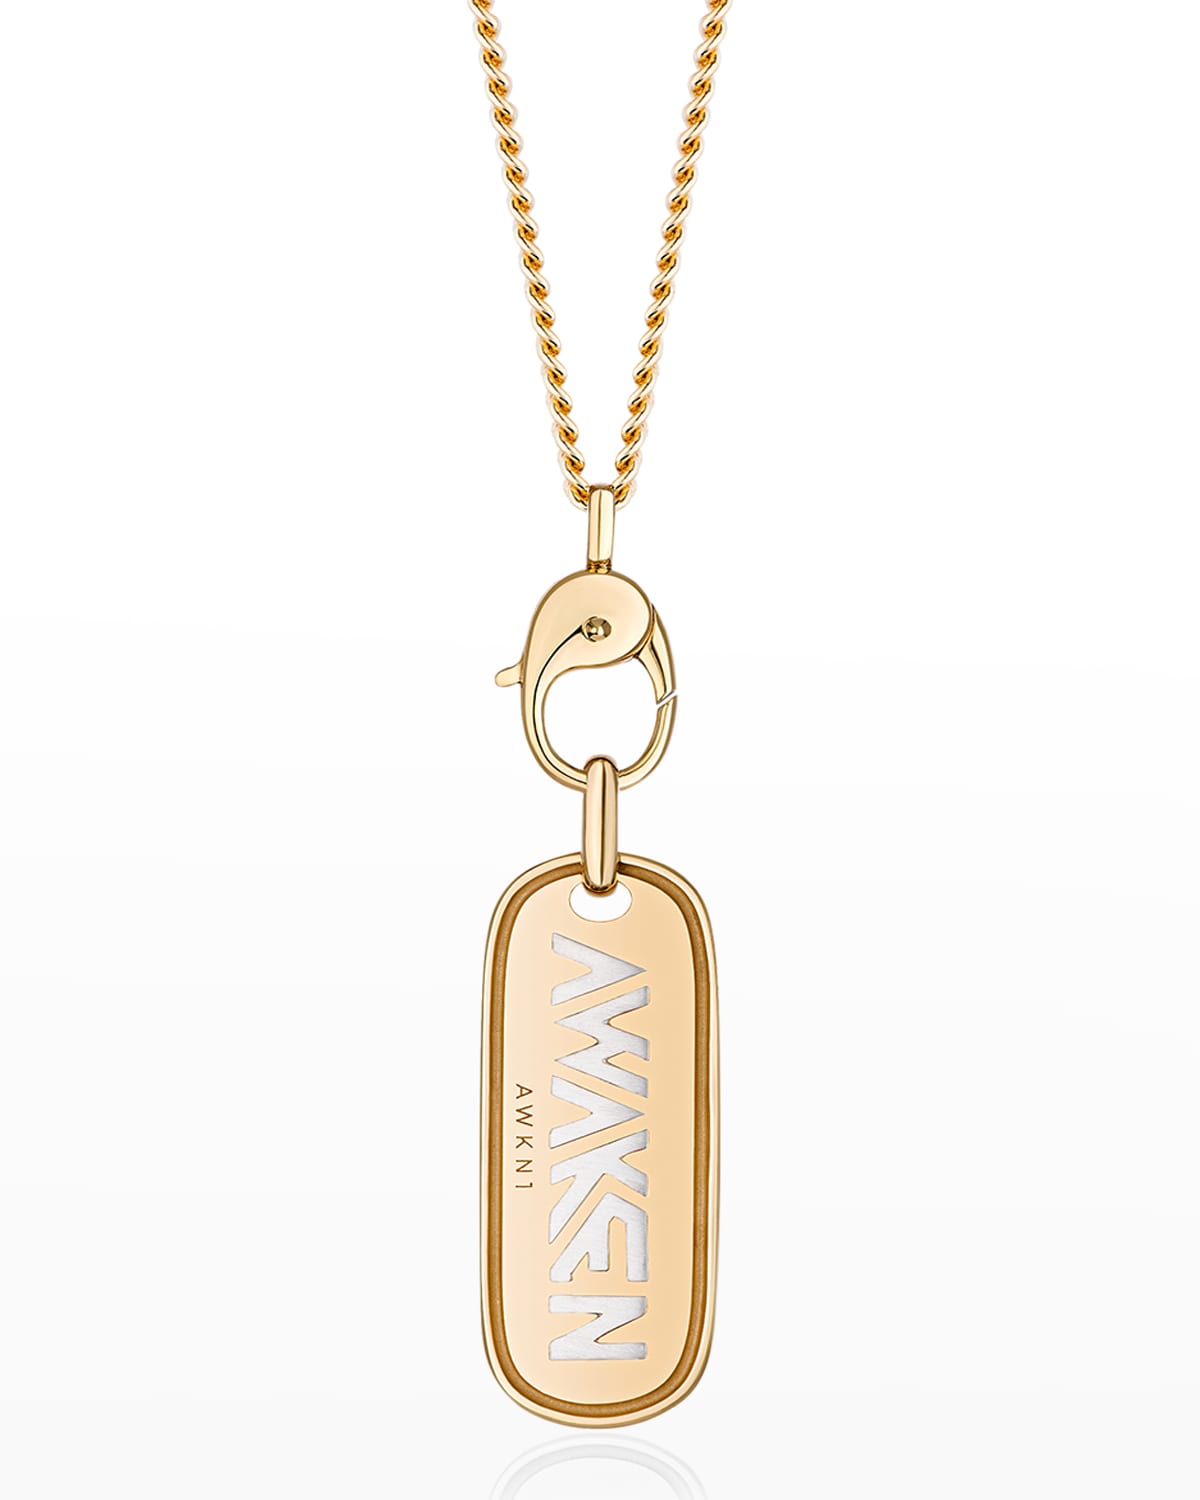 Awkn1 Arrow Gold Clasp Necklace